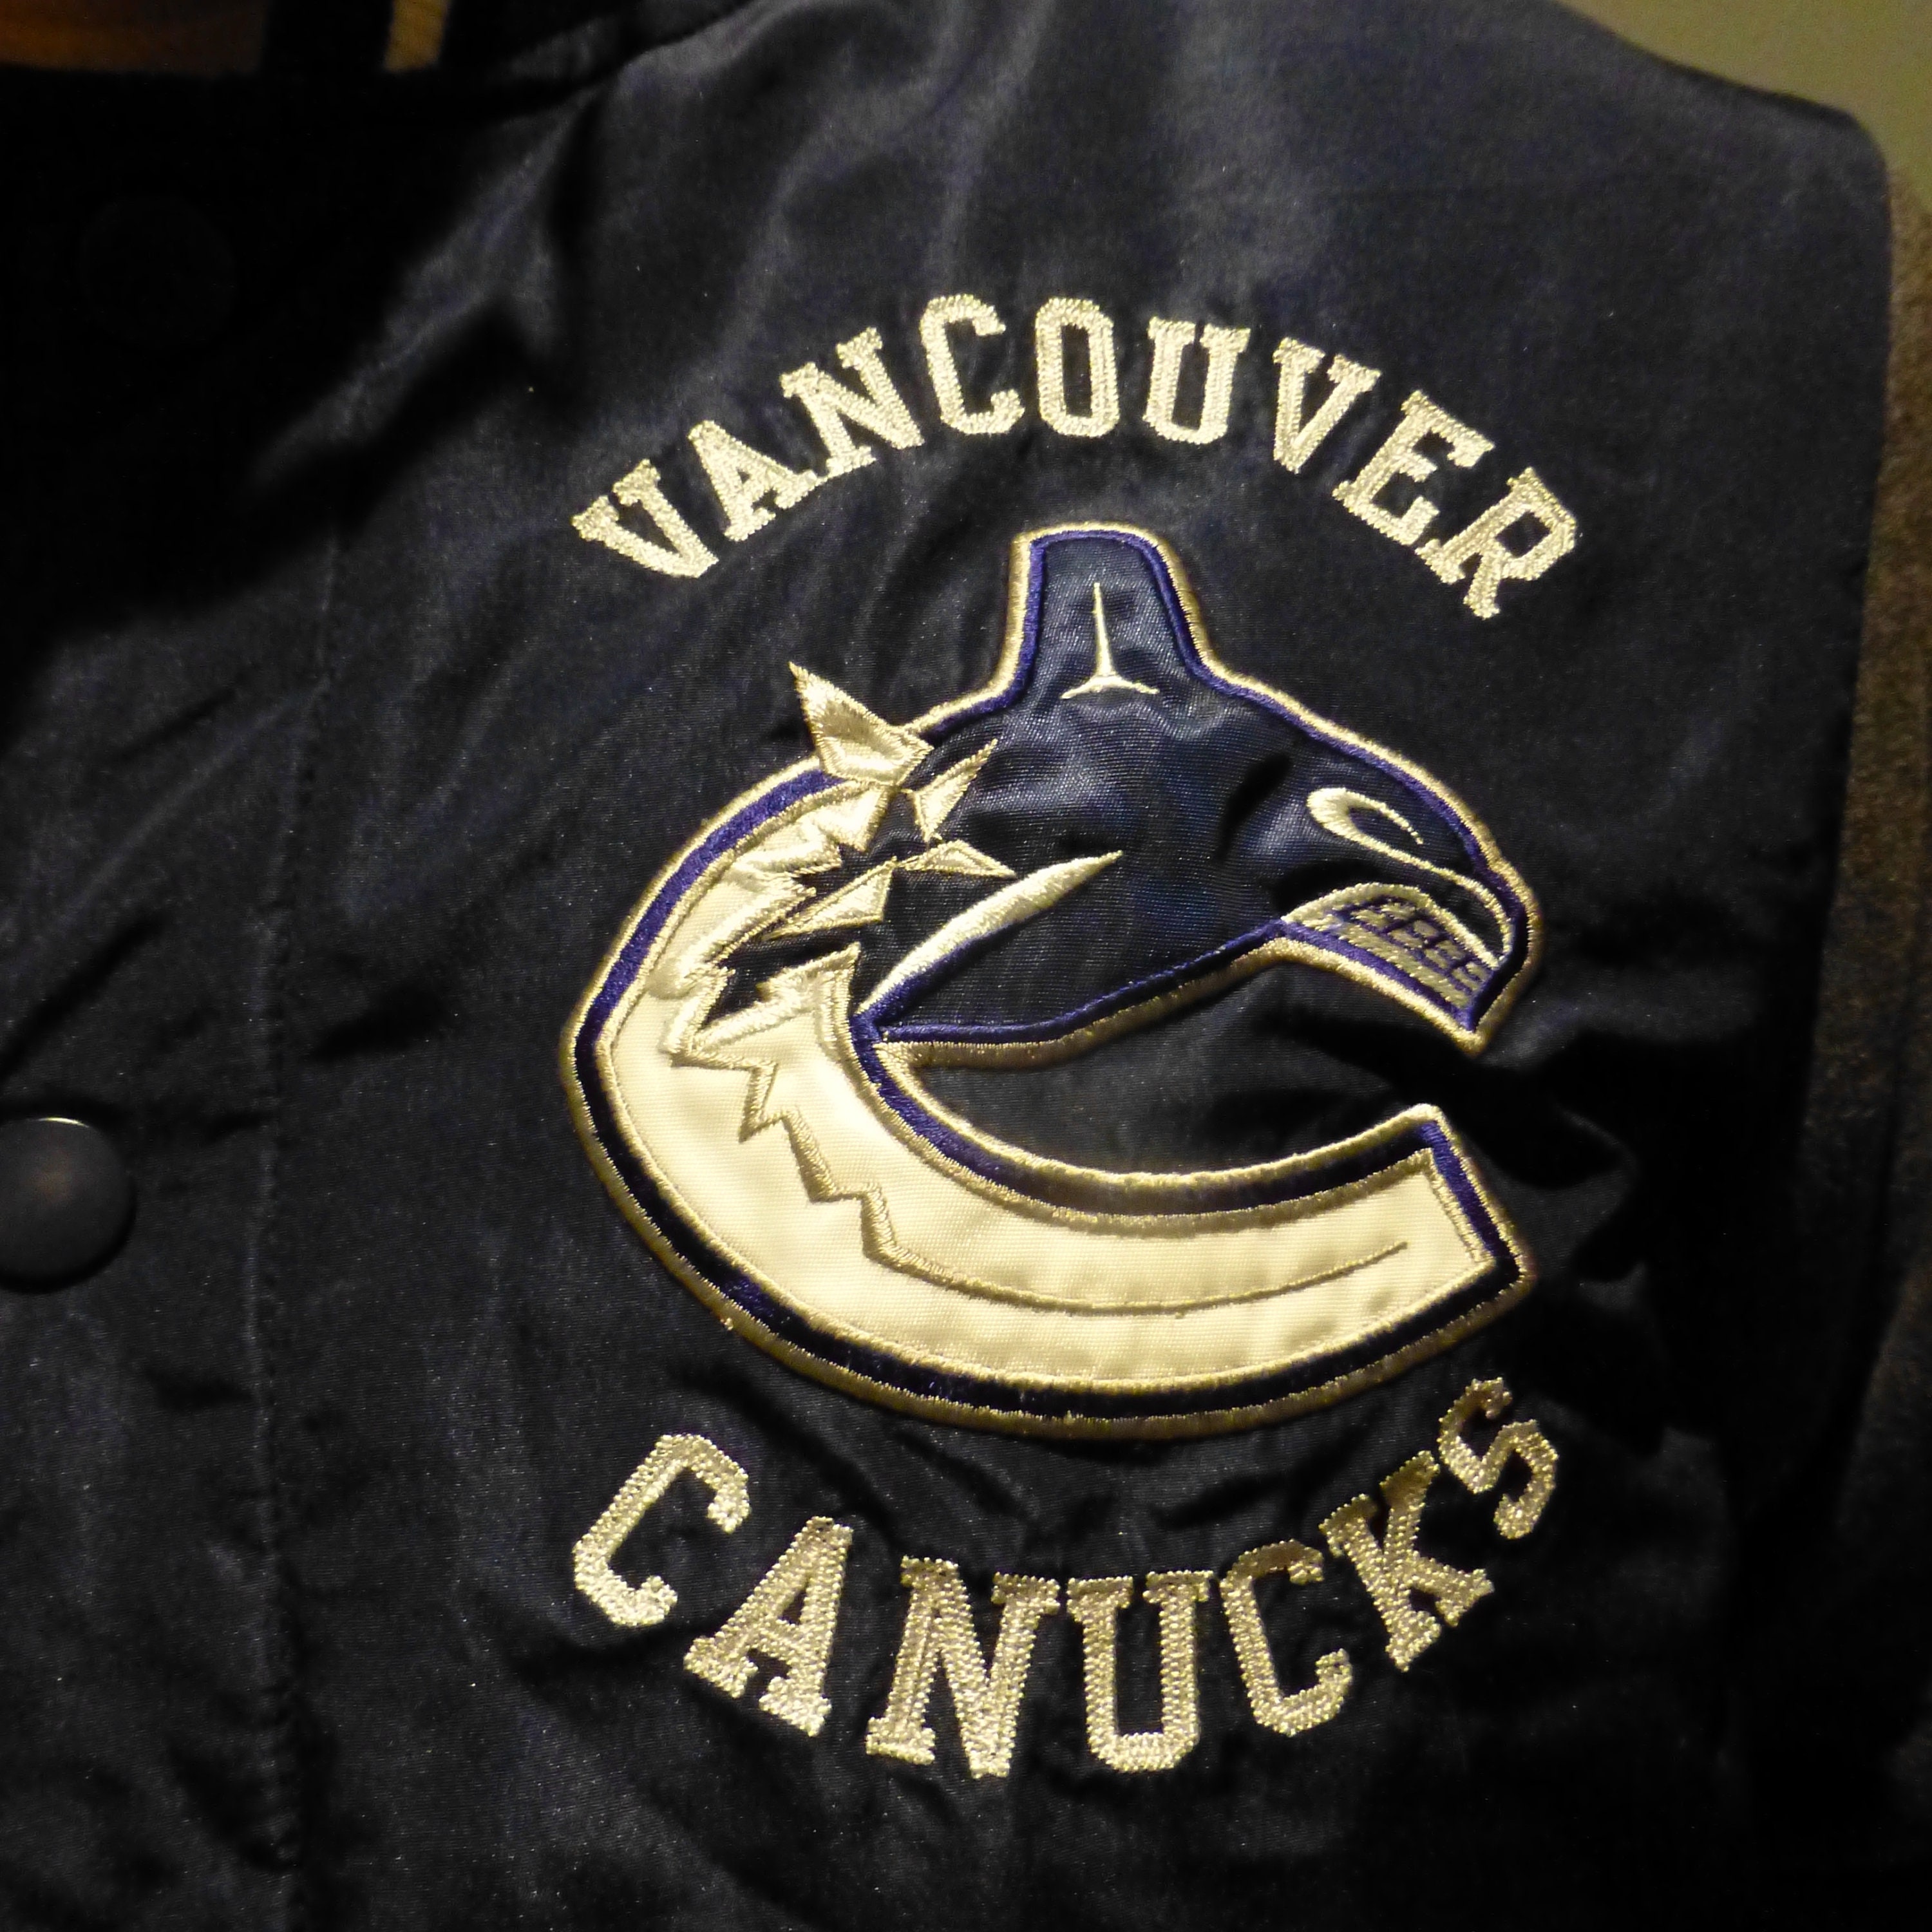 Men's Antigua Navy/Heather Gray Vancouver Canucks Victory Colorblock Pullover Hoodie Size: Small